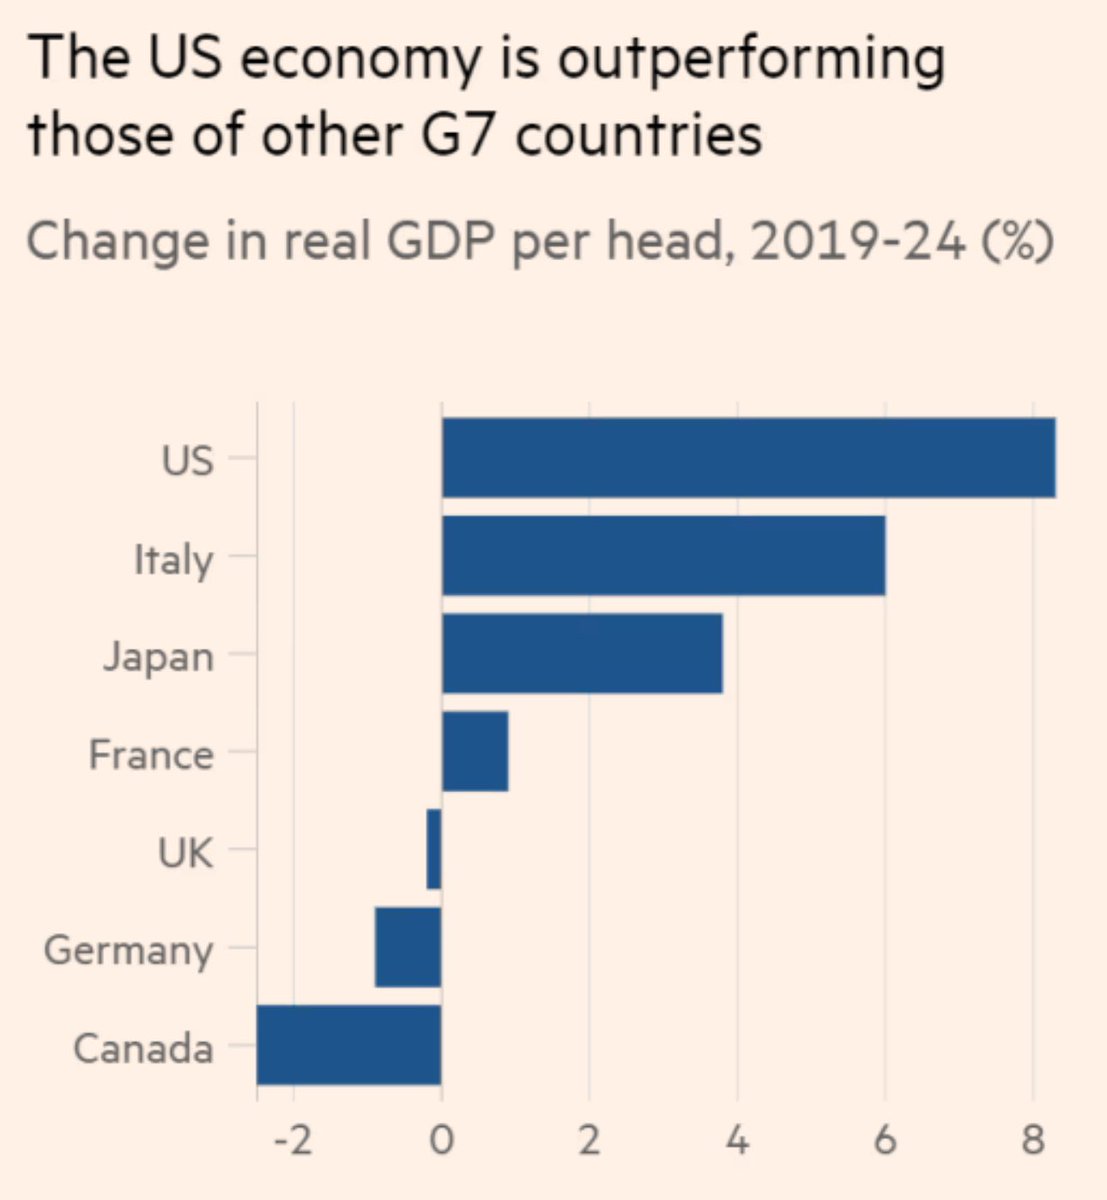 Germany and Canada have more in common than one may have thought